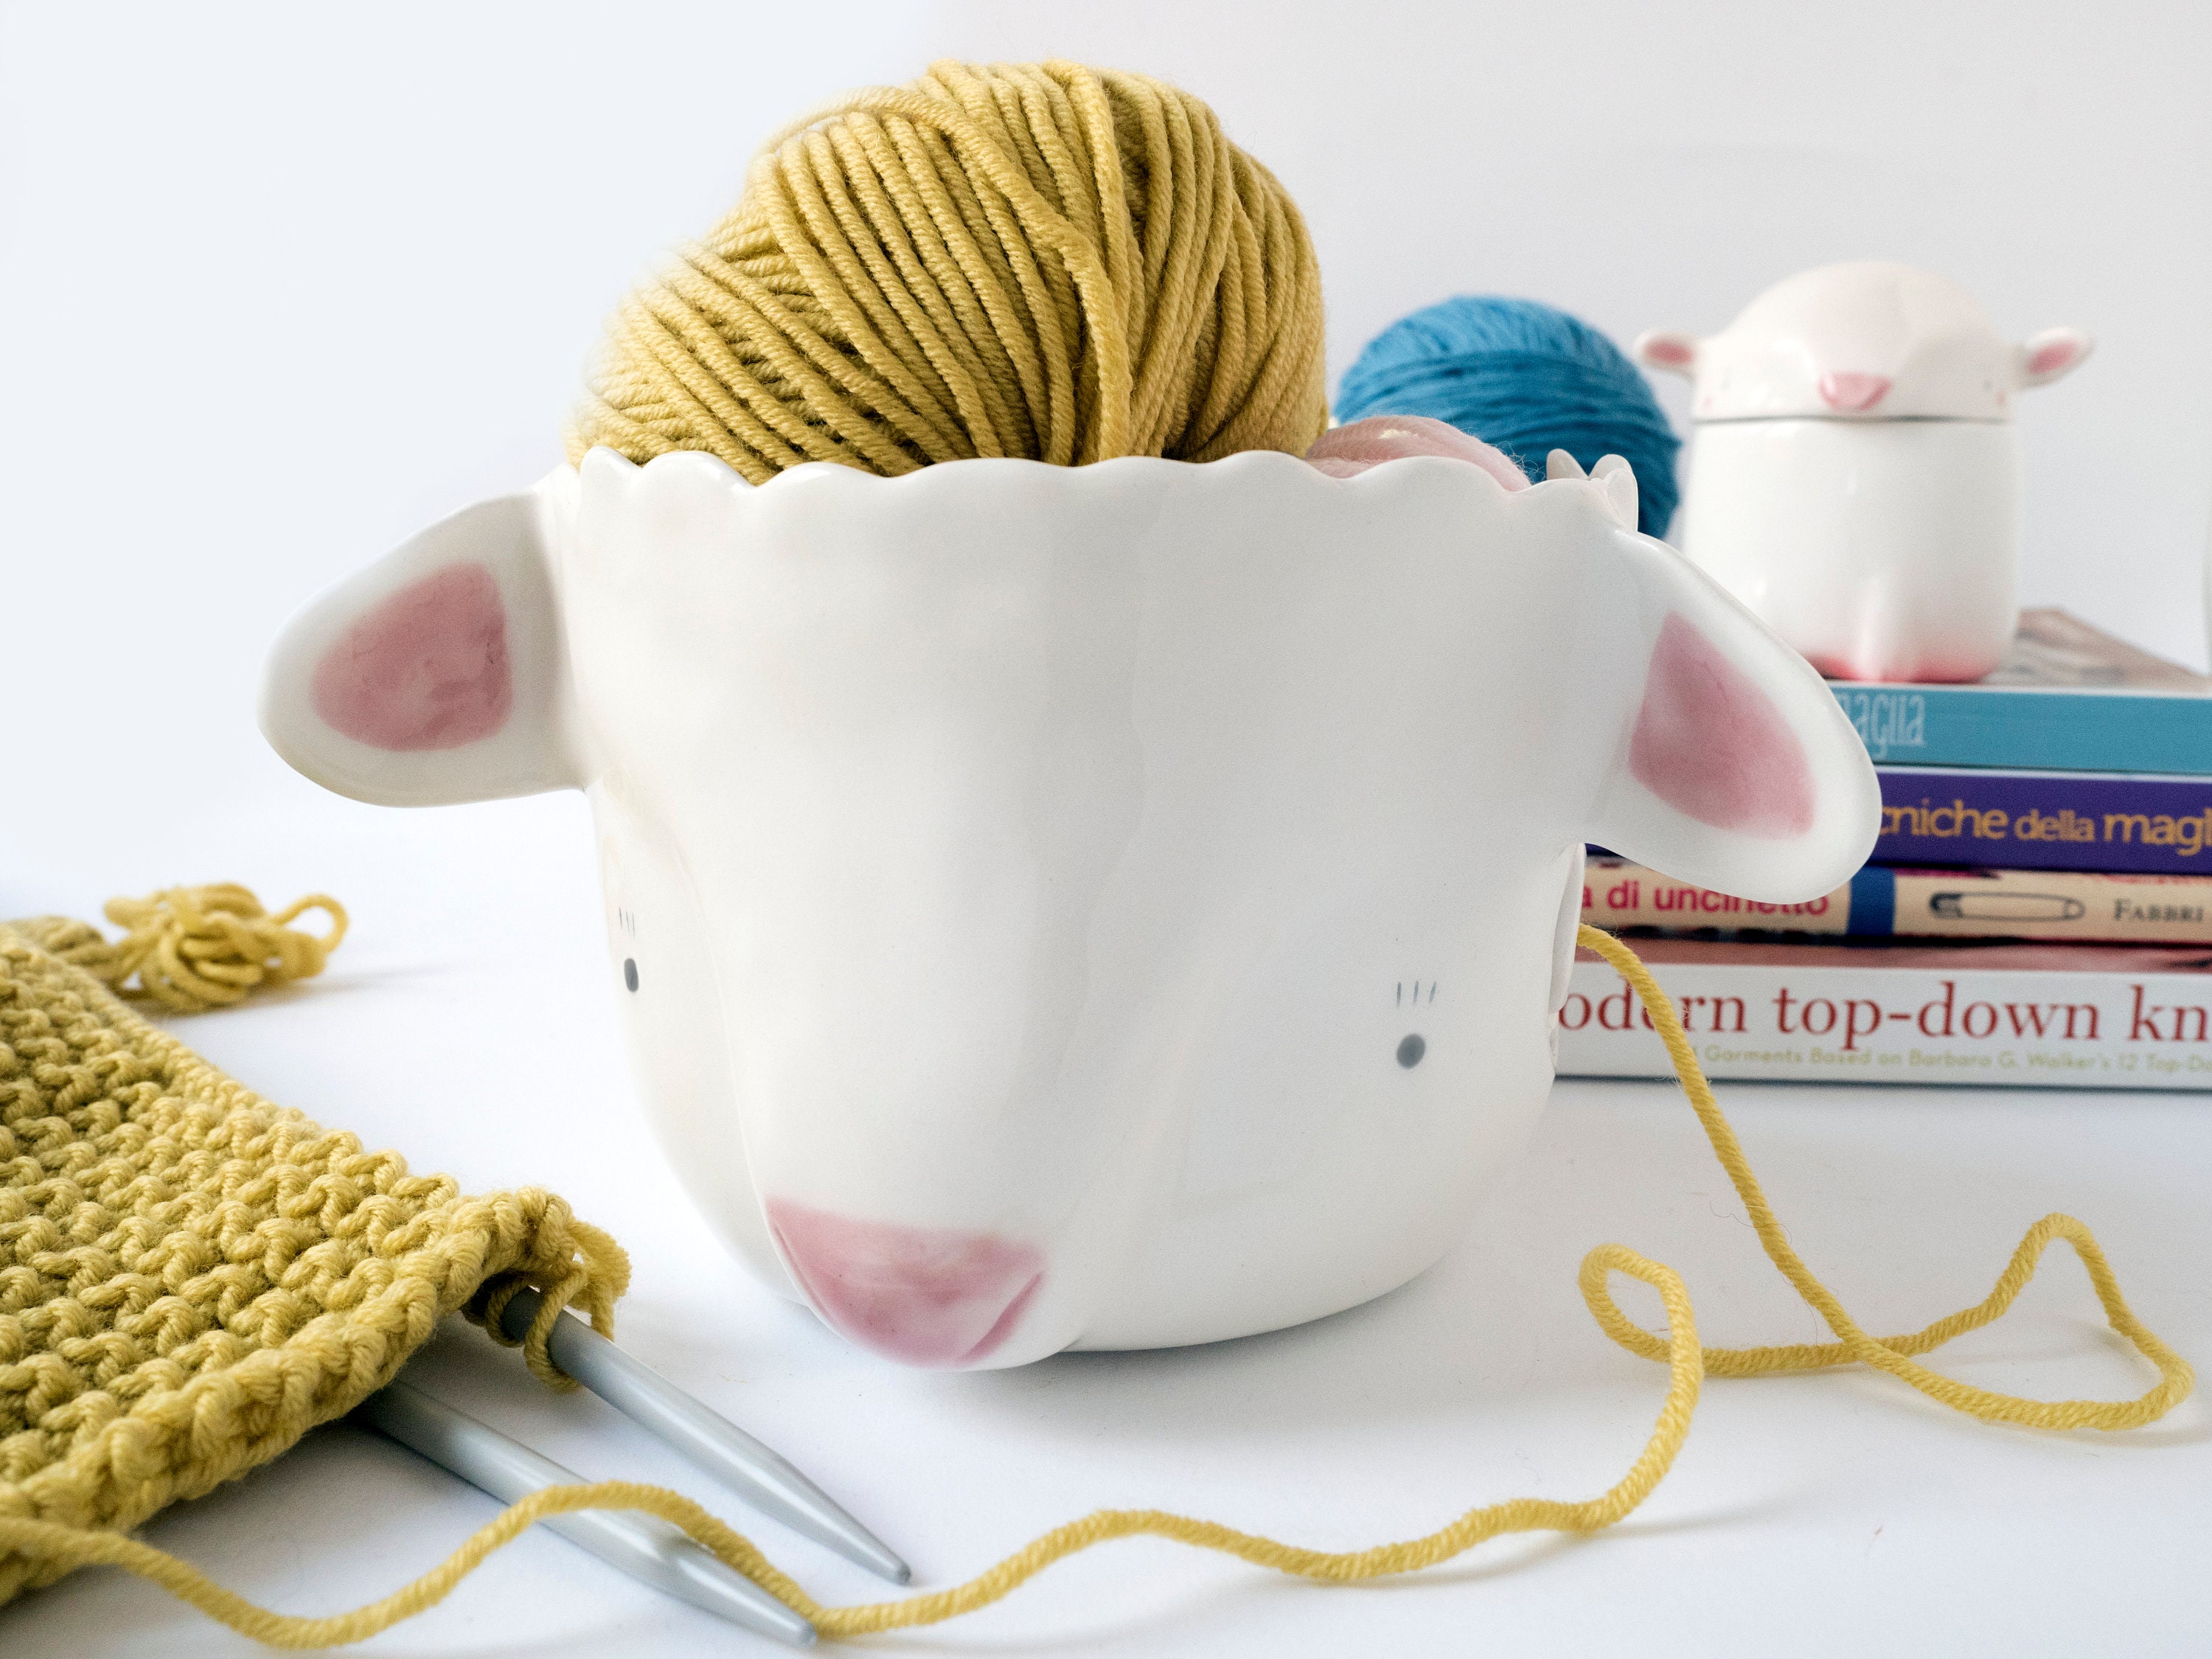 Gifts for DAD - 7 Ceramic Yarn Bowl Holder Bowls for Knitting Crochet for  Moms - Helia Beer Co